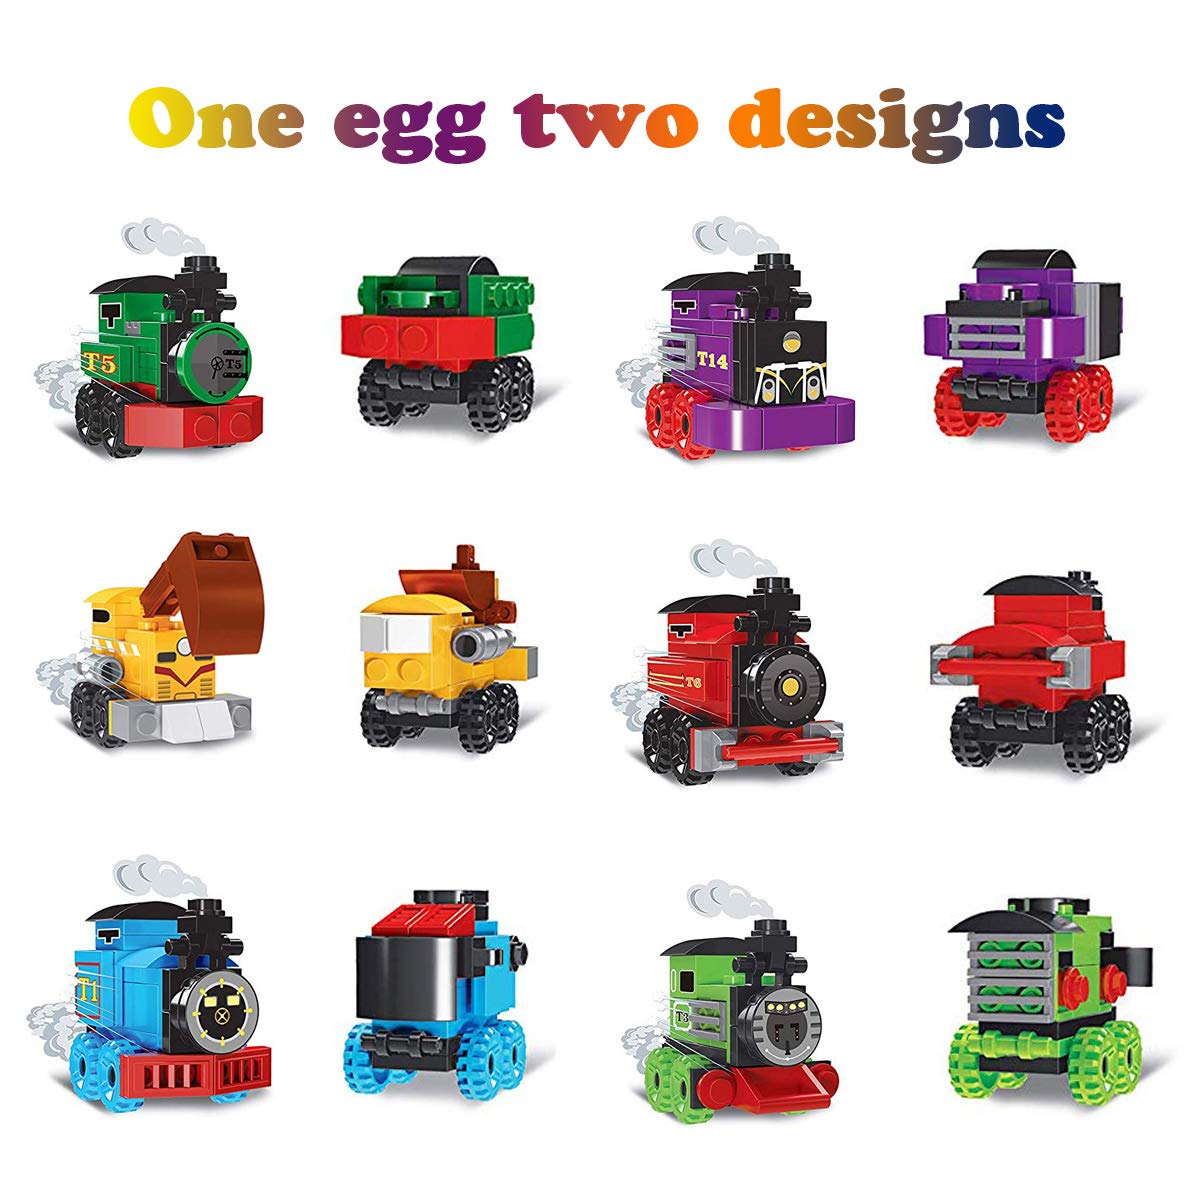 Anditoy 6 Pack Easter Eggs with Train Building Blocks Toys Inside Train Set for Kids Boys Girls Easter Basket Stuffers Fillers Gifts